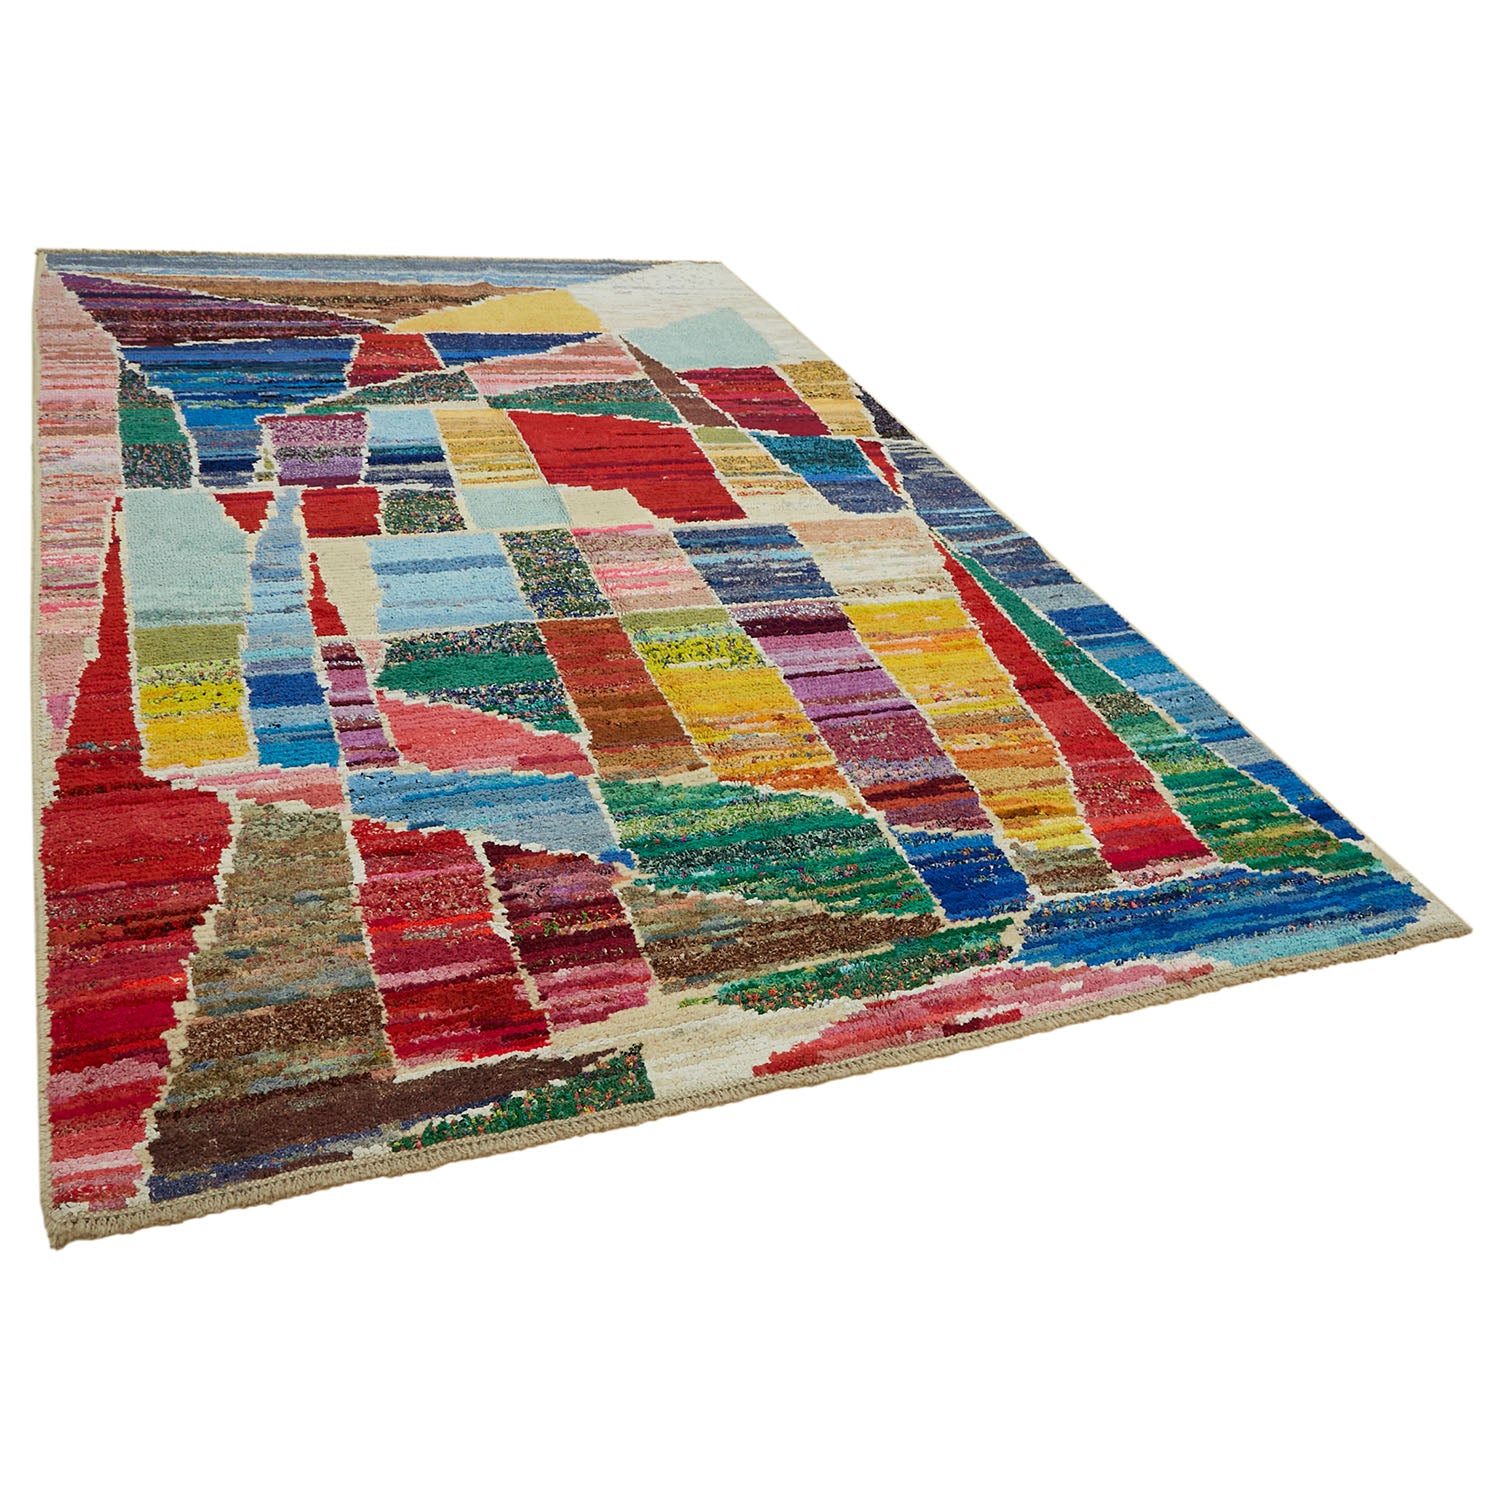 Contemporary Wool Rug - 6'6" x 10'3" Default Title